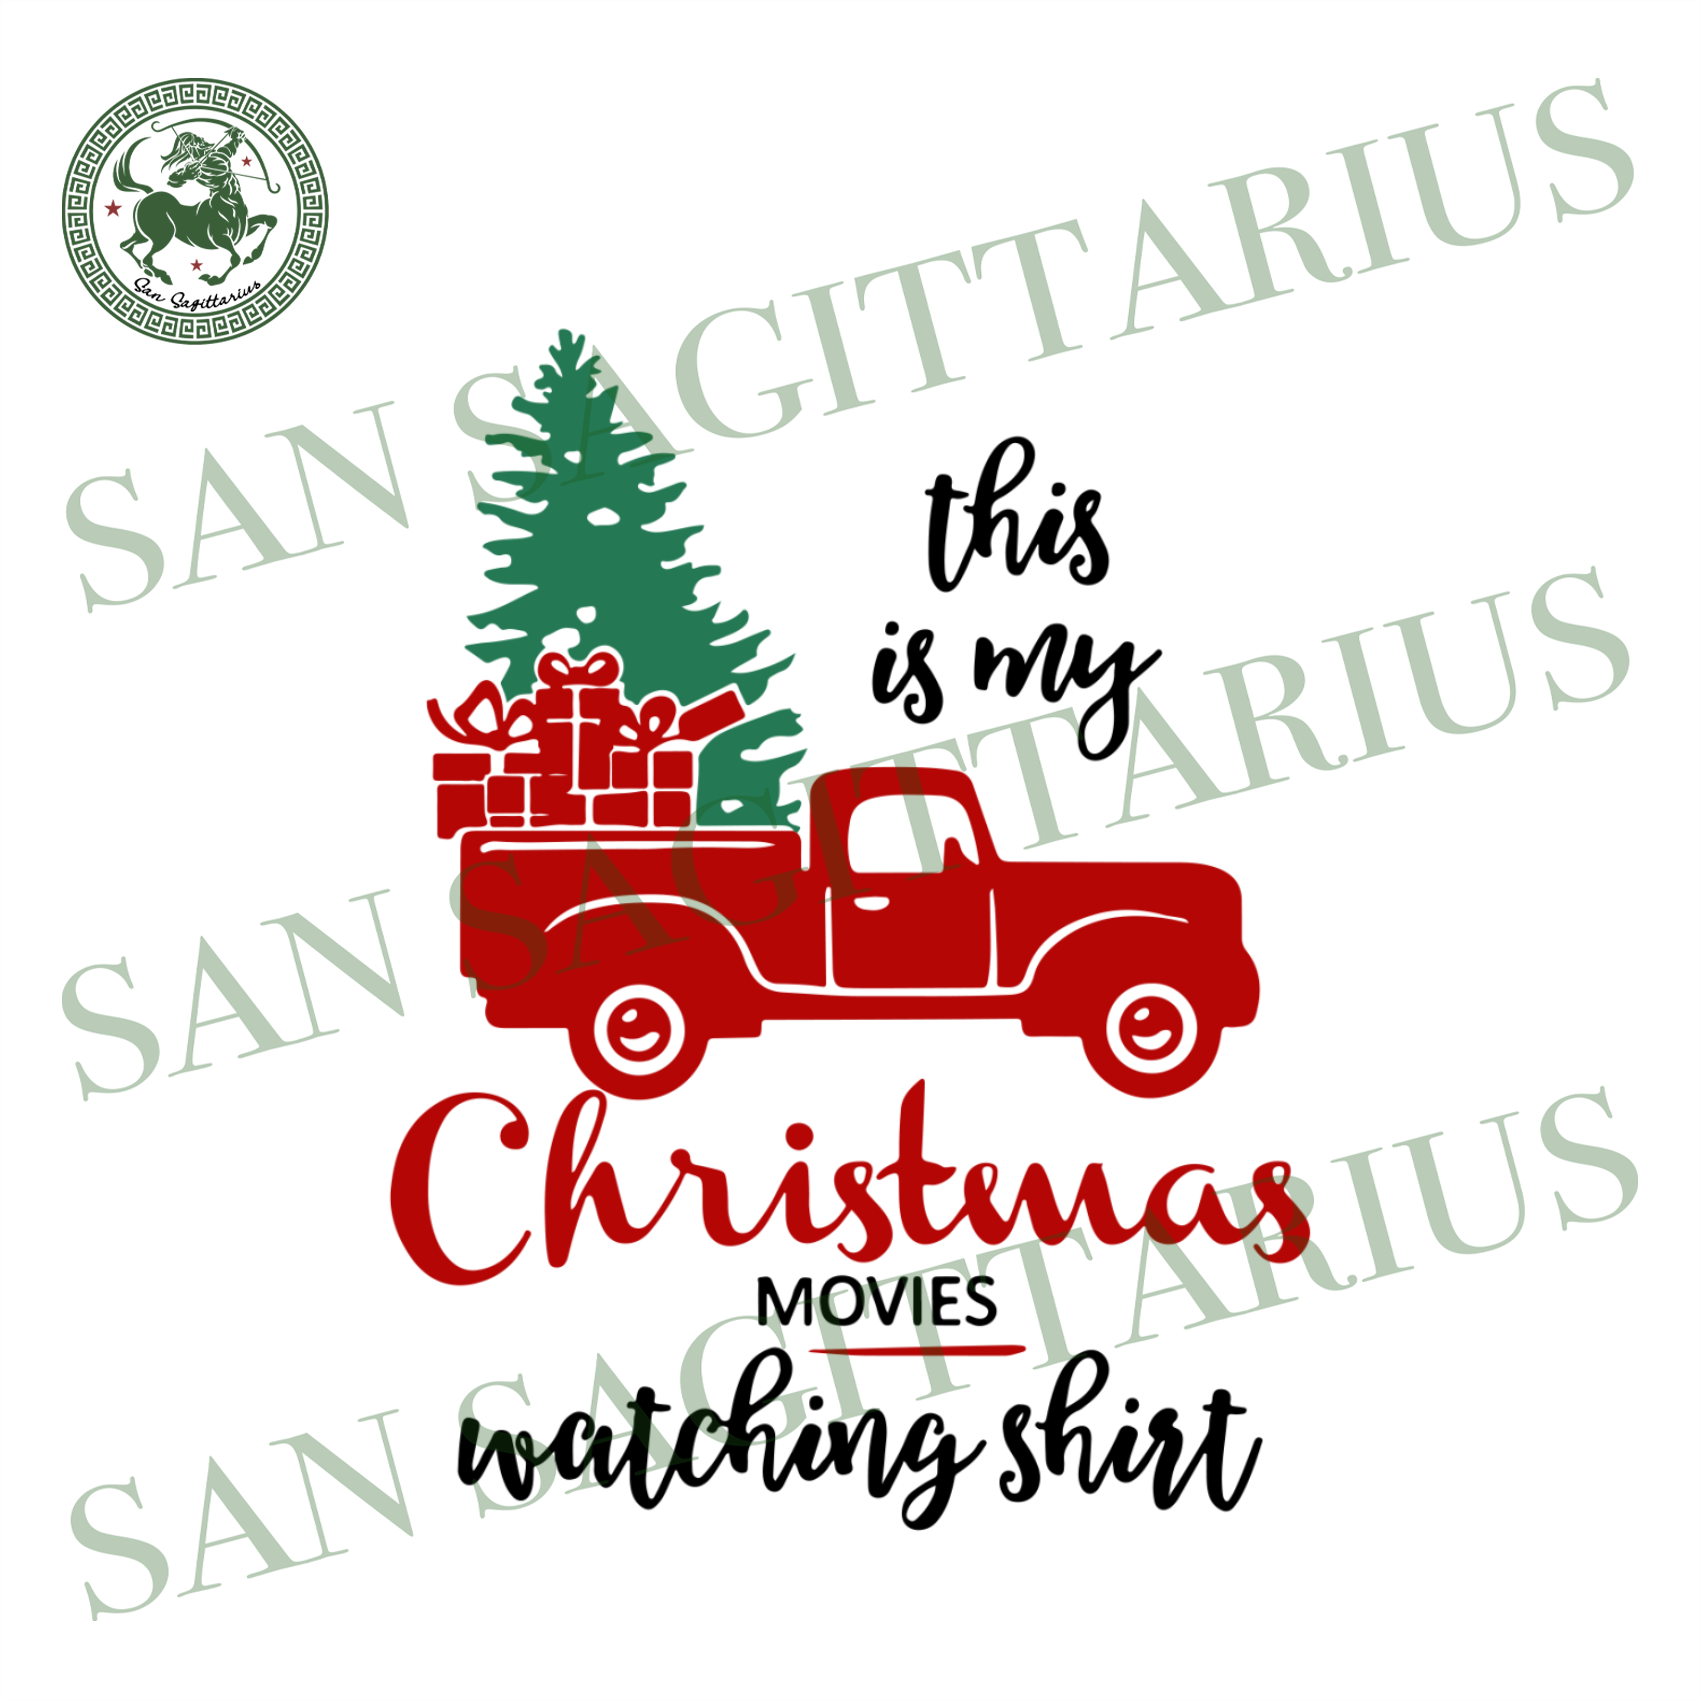 Download This Is My Christmas Movies Svg Christmas Svg Christmas Quotes Chri San Sagittarius